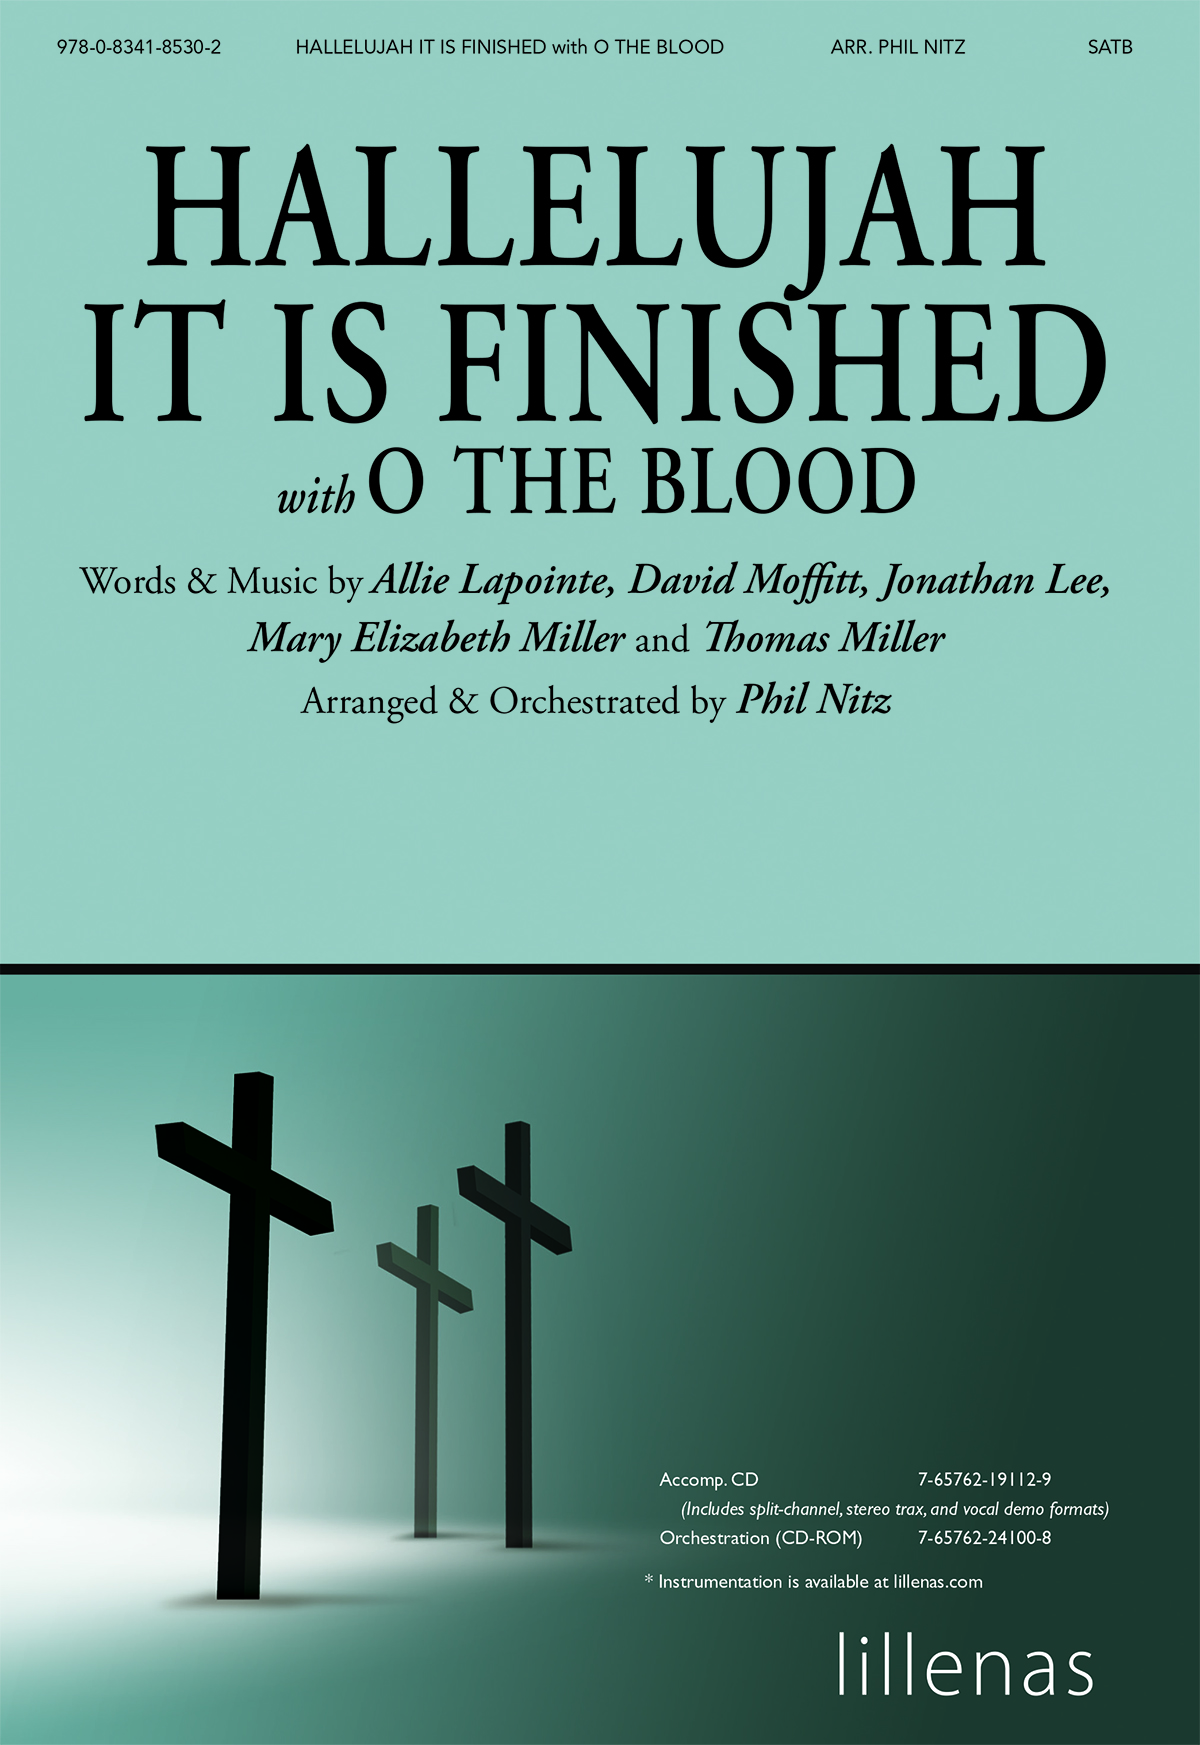 Hallelujah It Is Finished with O the Blood